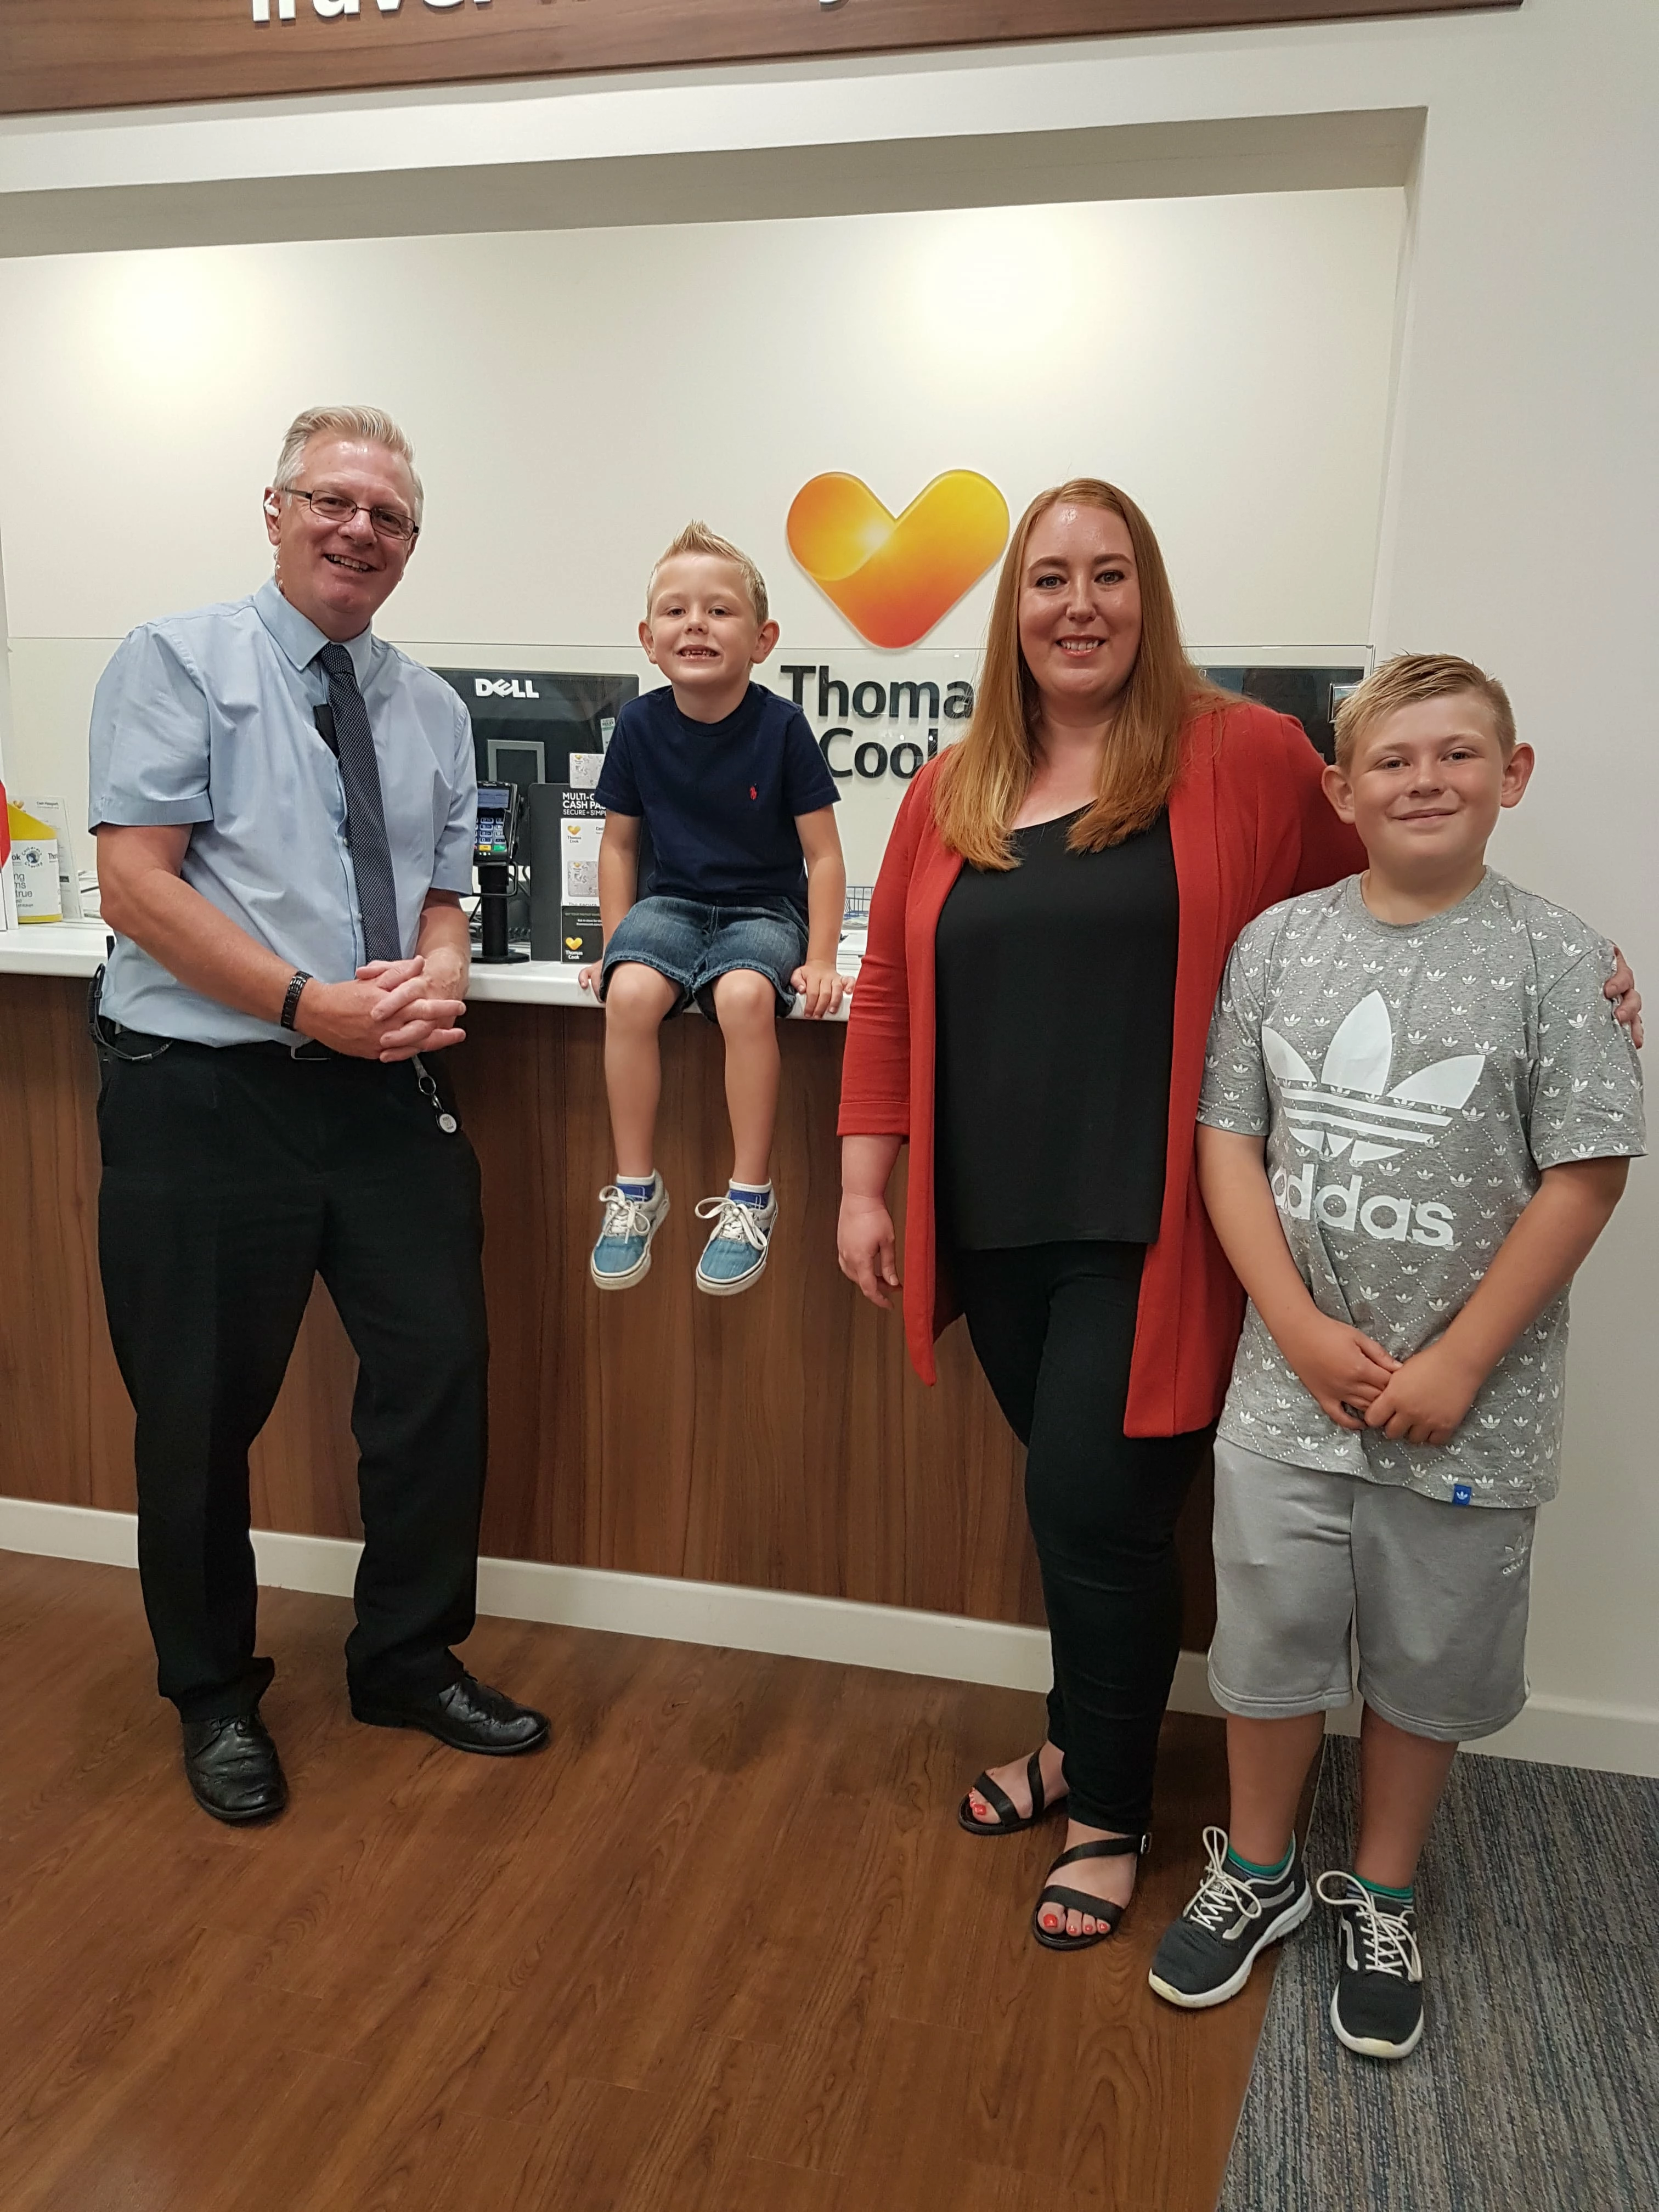 Annette Siddall and family with Alhambra Centre Manager John Tarrant, collecting her prize from Thomas Cook